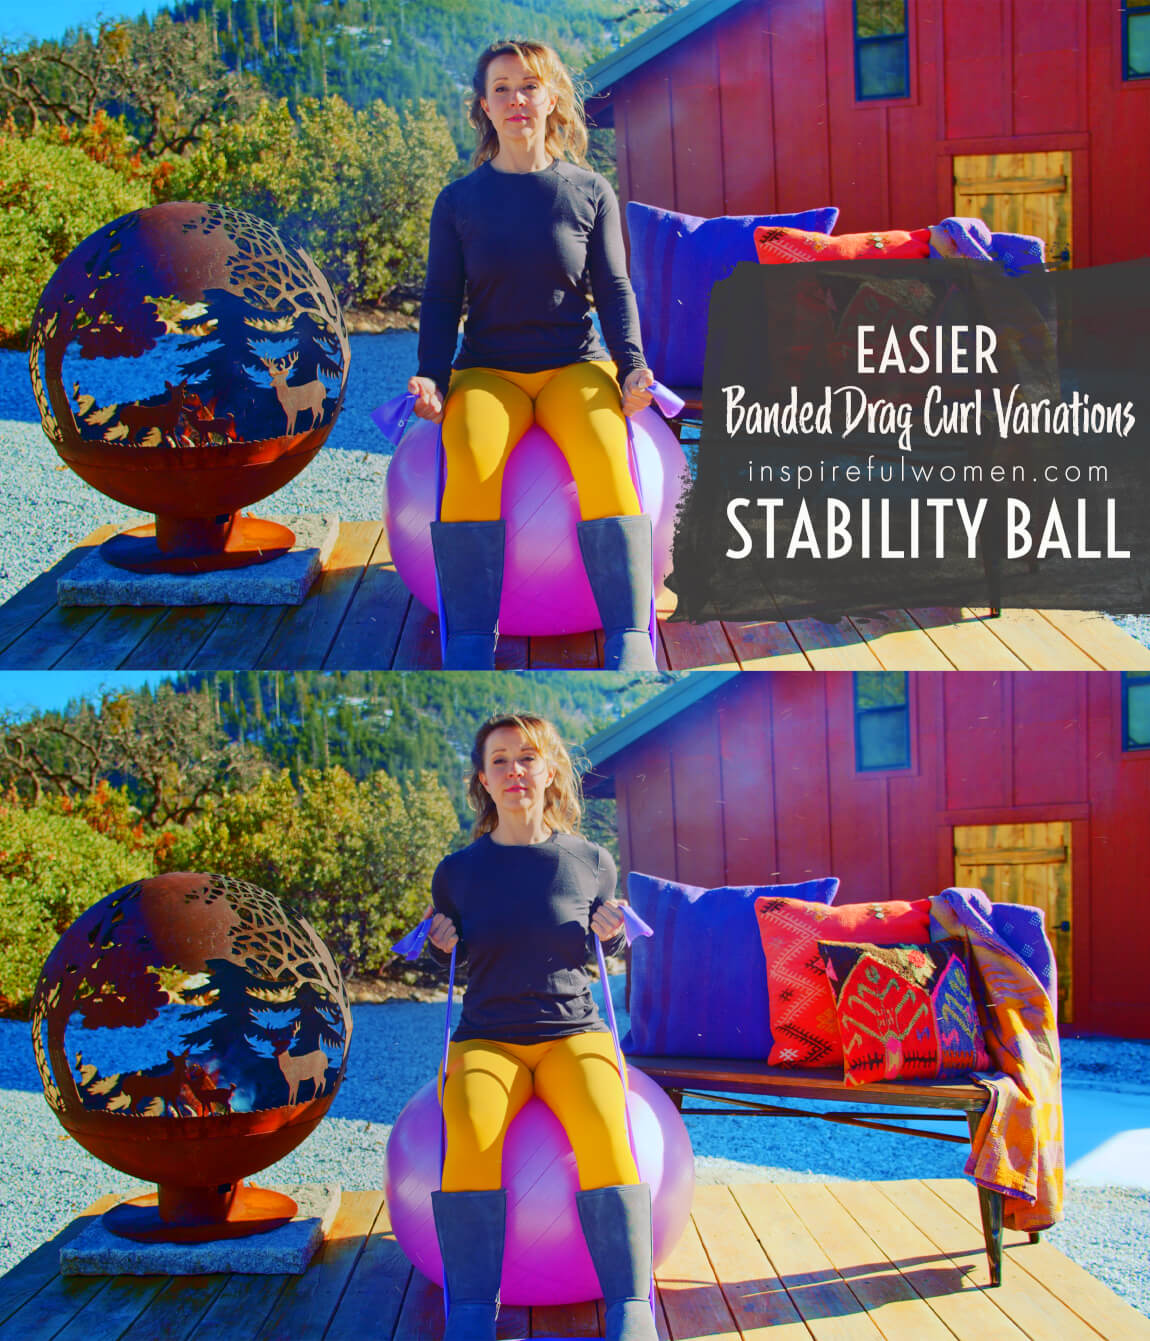 stability-ball-resistance-band-drag-curls-bicep-exercise-variation-easier